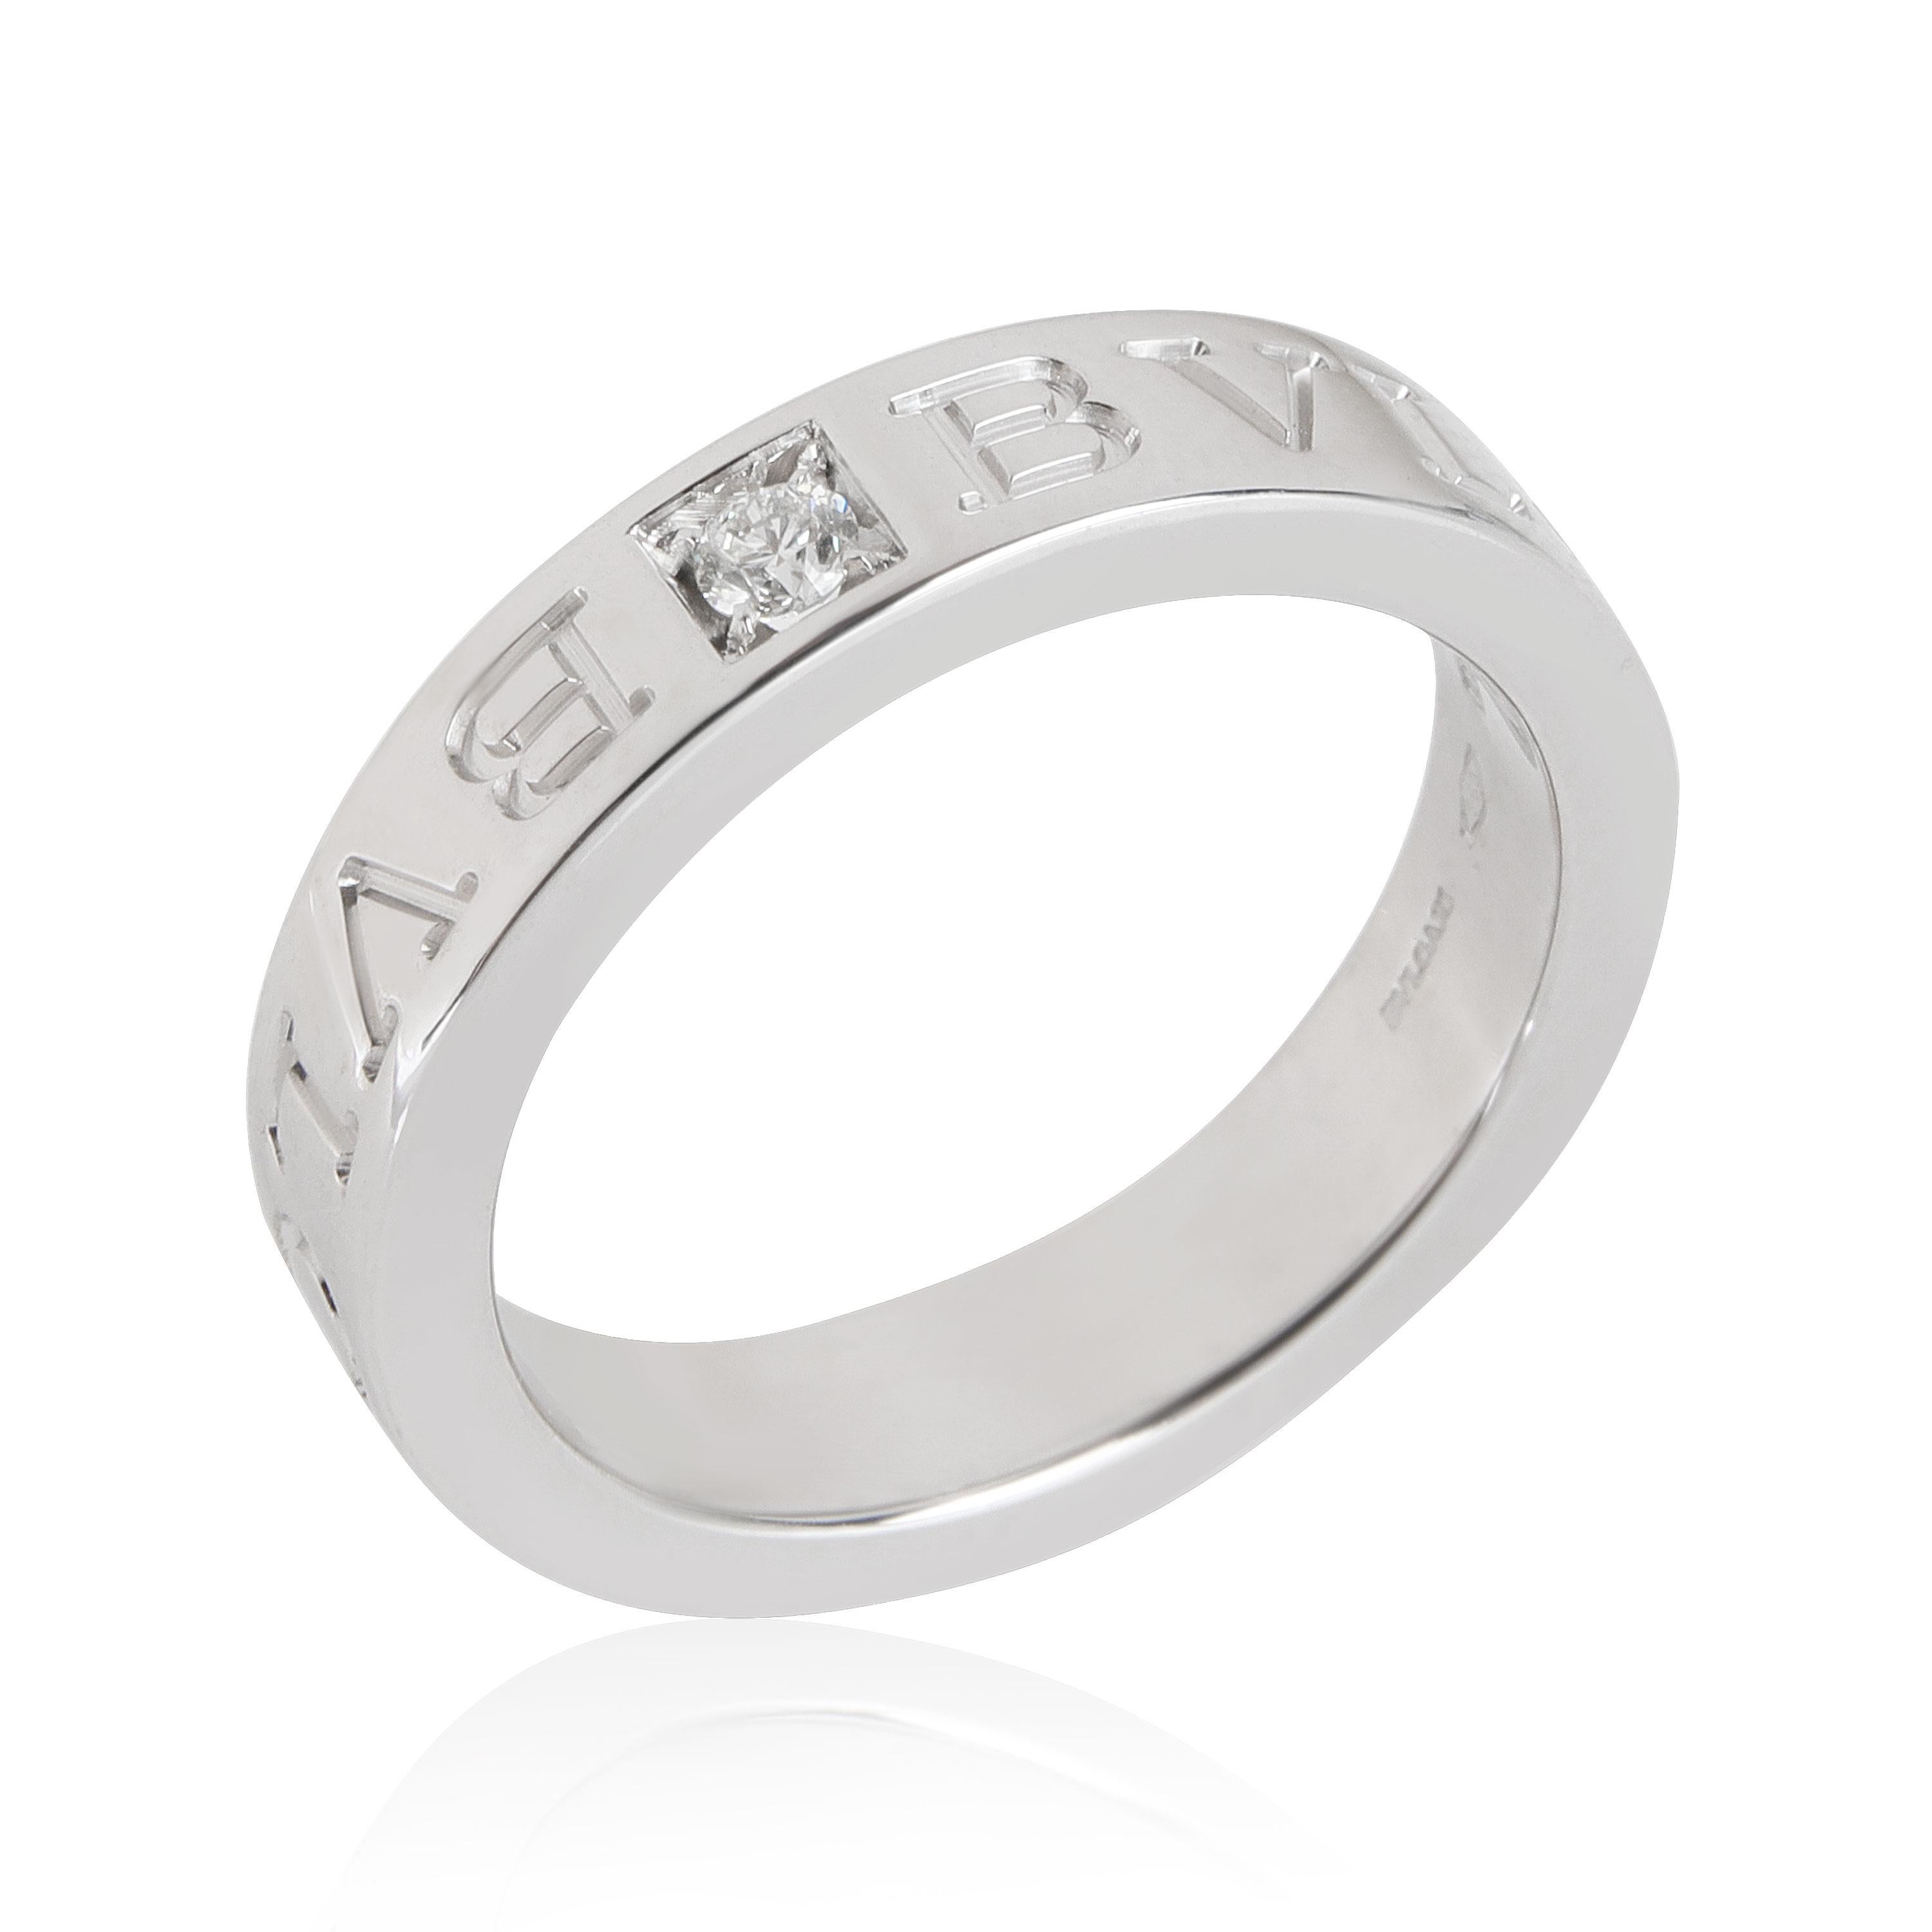 Bulgari Bvlgari Diamond Band in 18kt White Gold 0.02 CTW In Excellent Condition For Sale In New York, NY